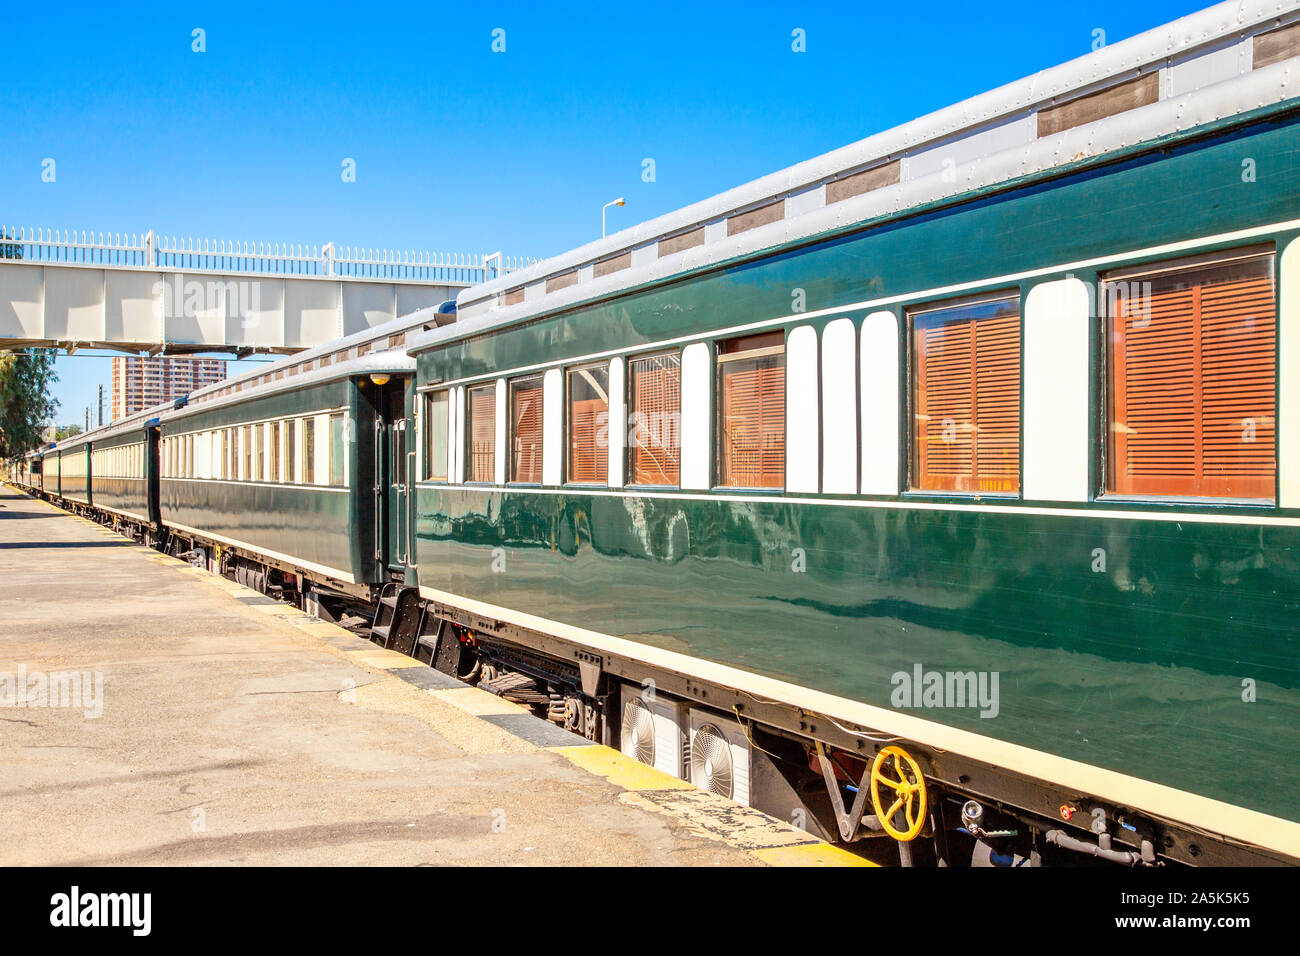 Namibian passenger train standing on the rails ready for departure, Windhoek train station, Namibia Stock Photo